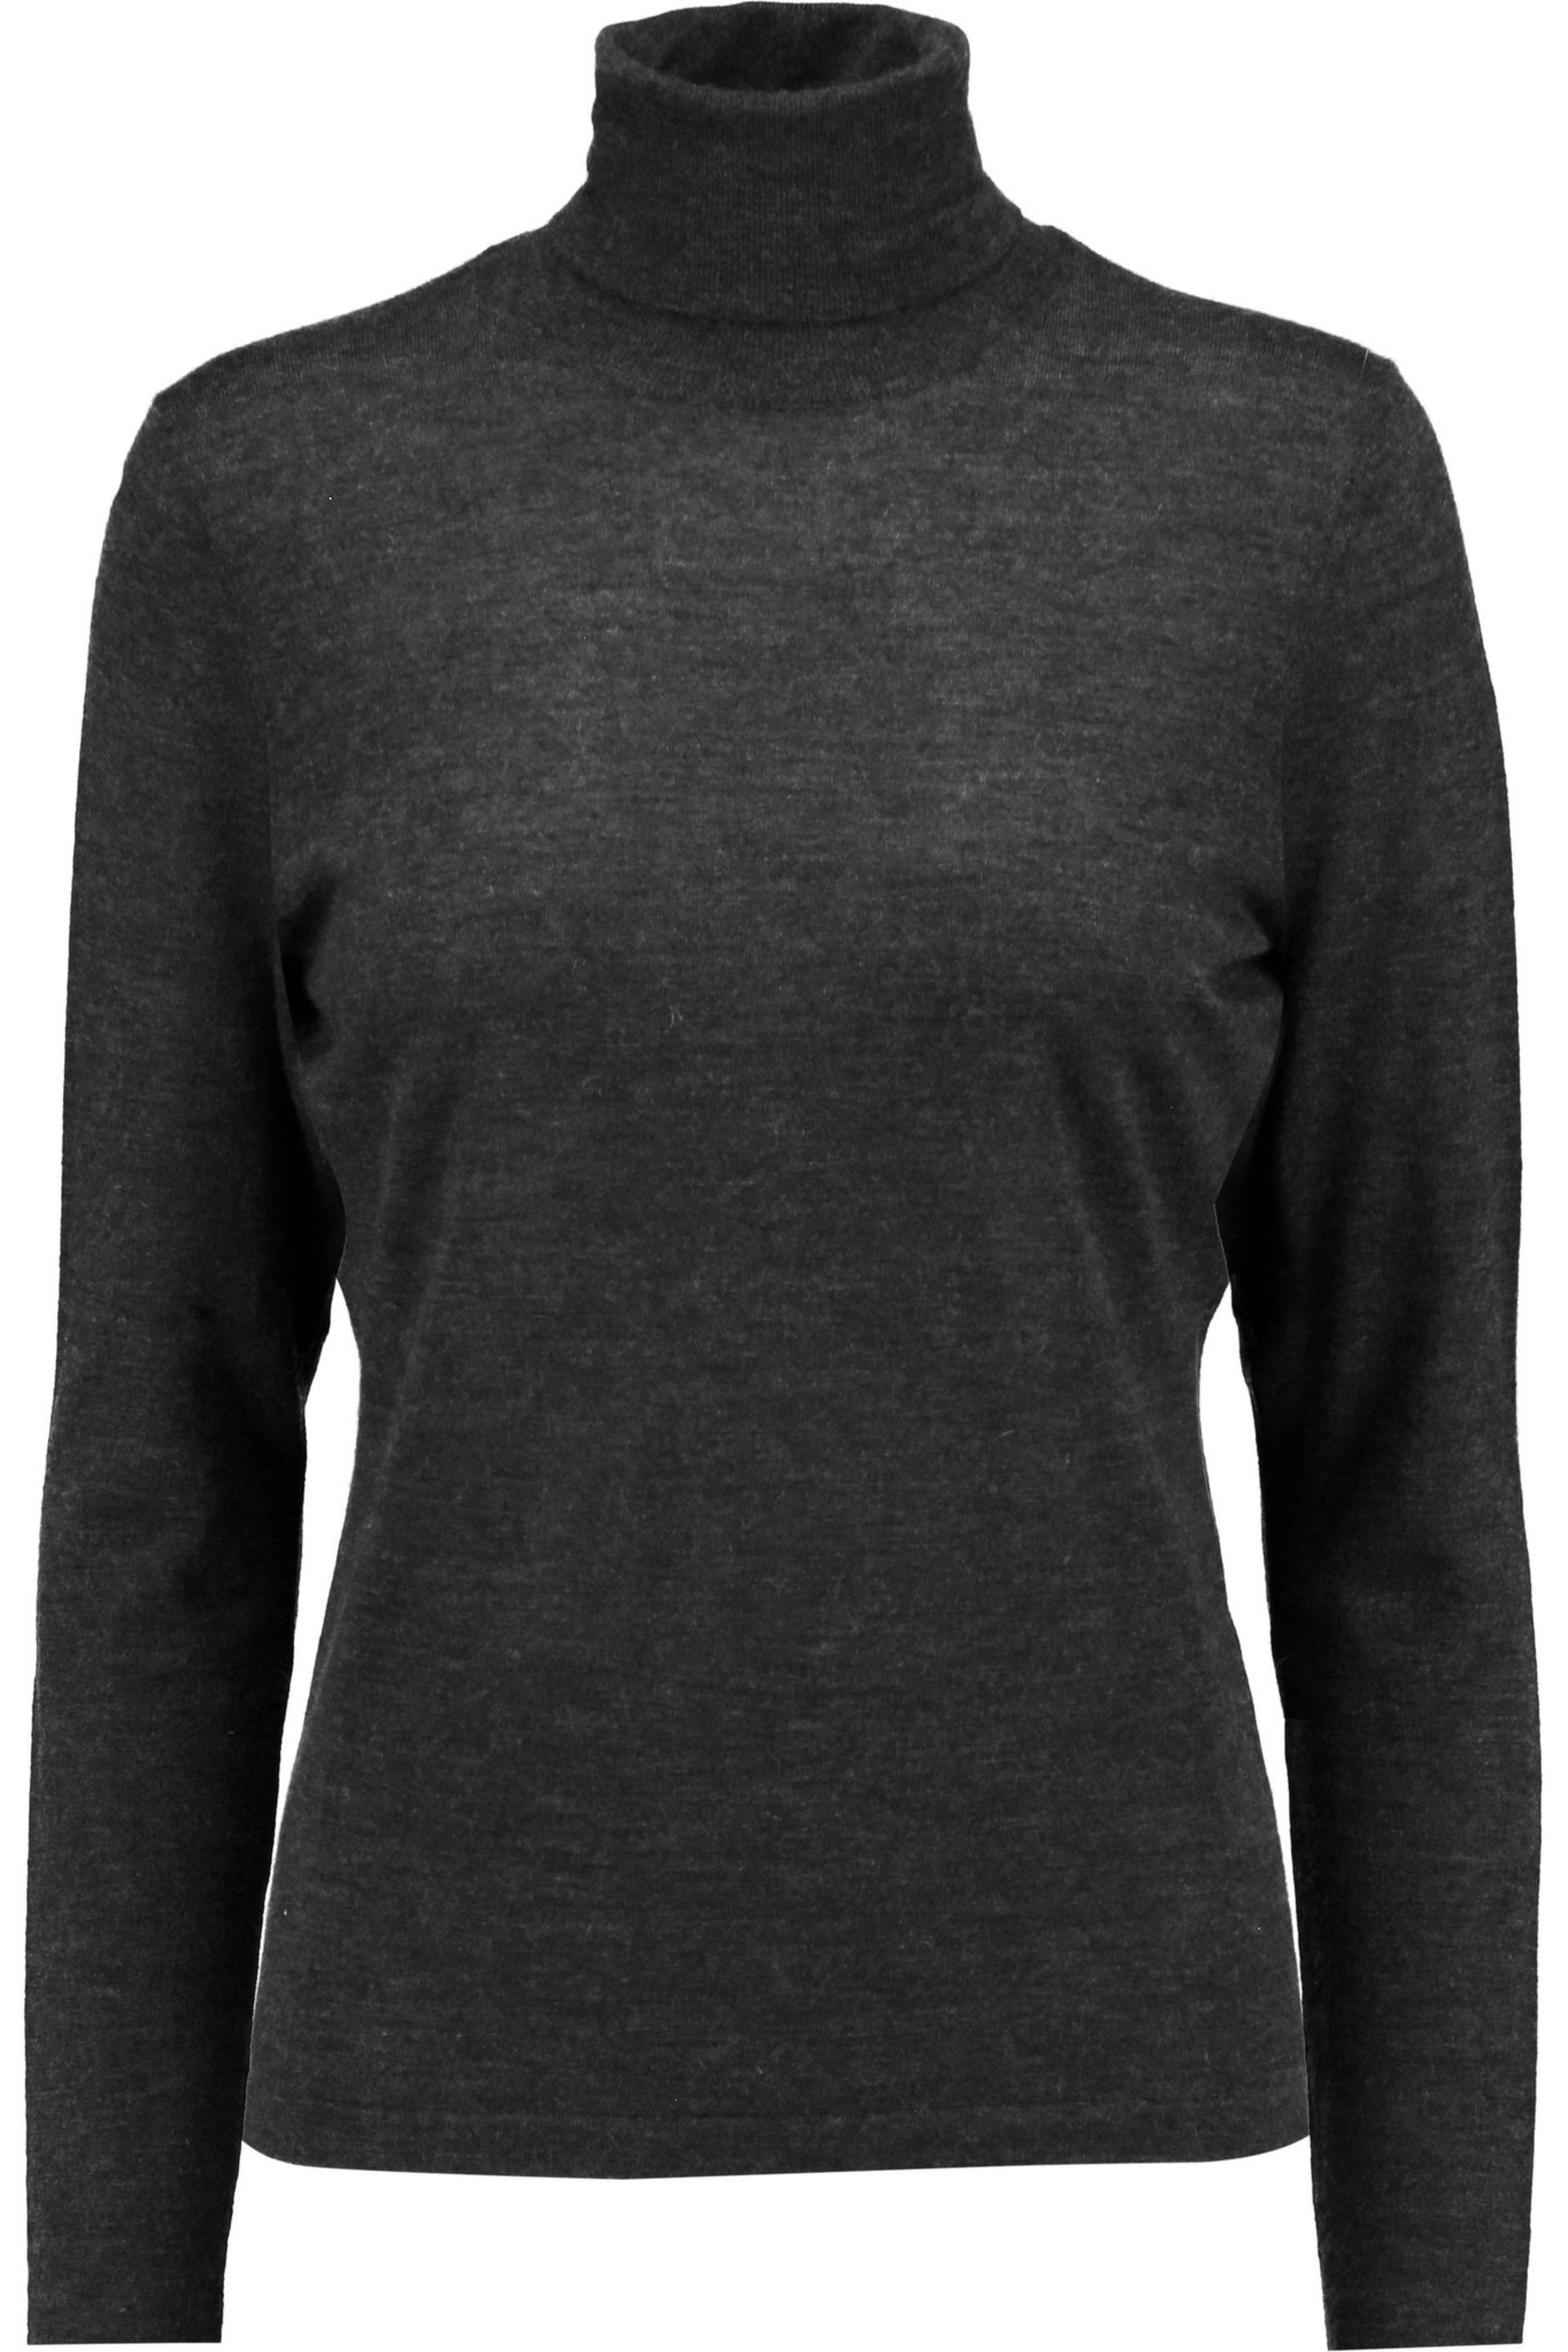 N.Peal Cashmere Mélange Cashmere Turtleneck Sweater Charcoal in Gray - Lyst